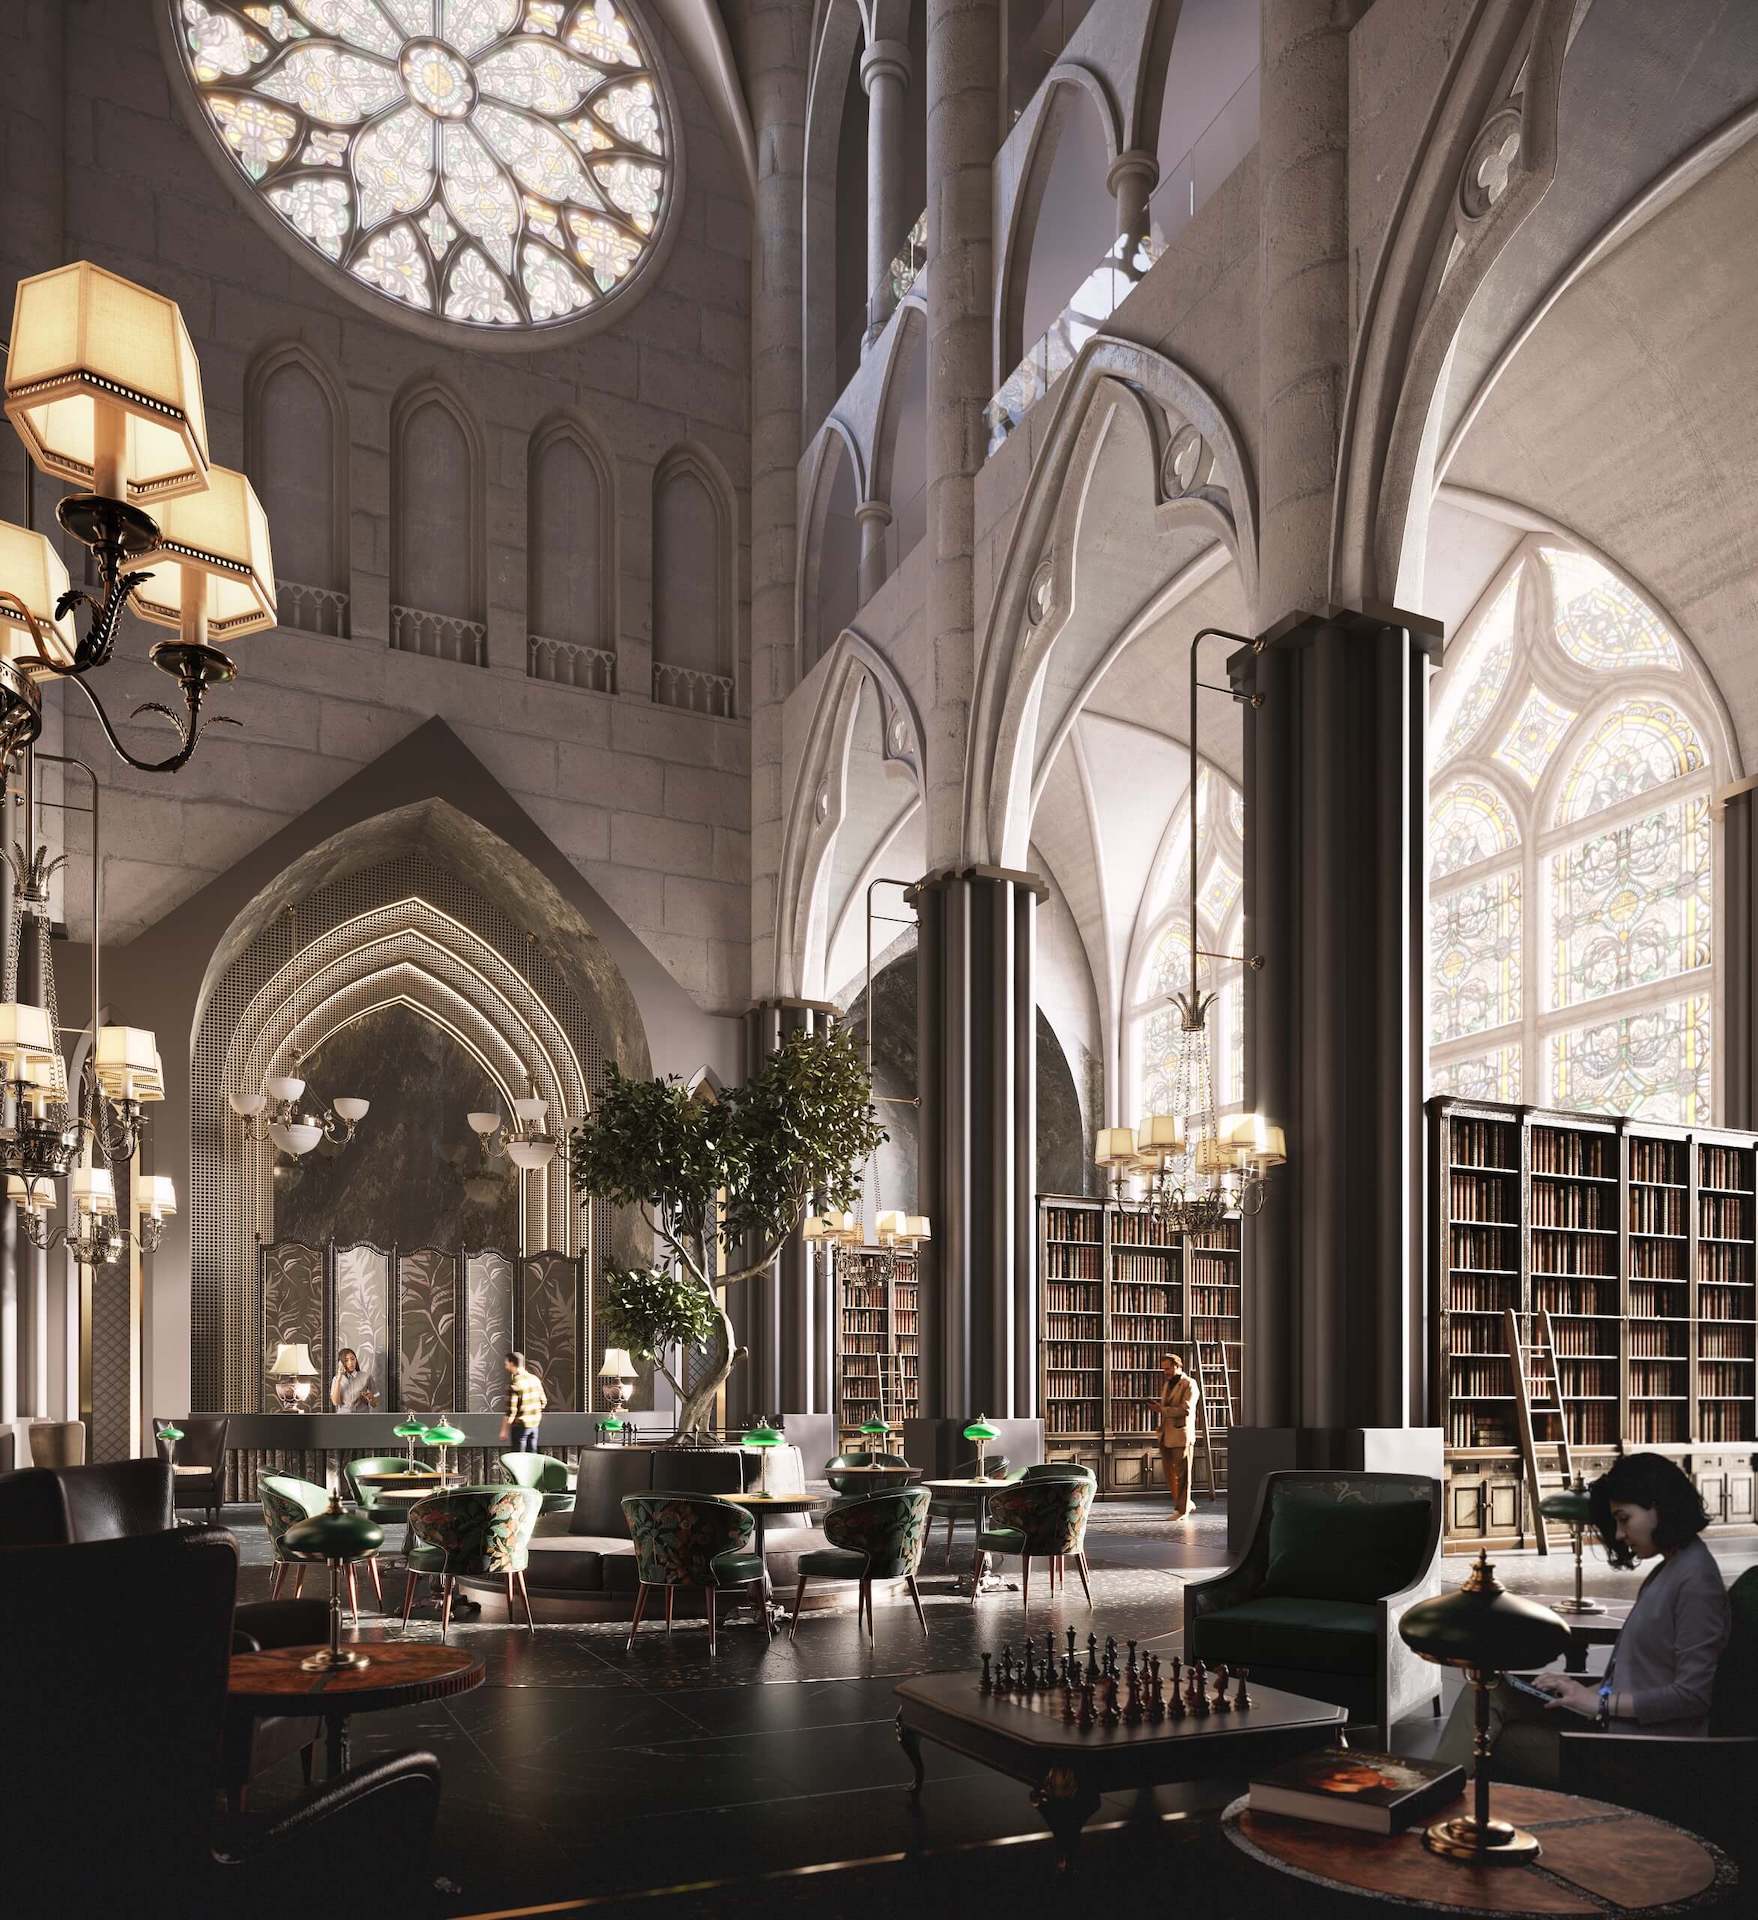 3D Rendering of a Hotel Lobby Library